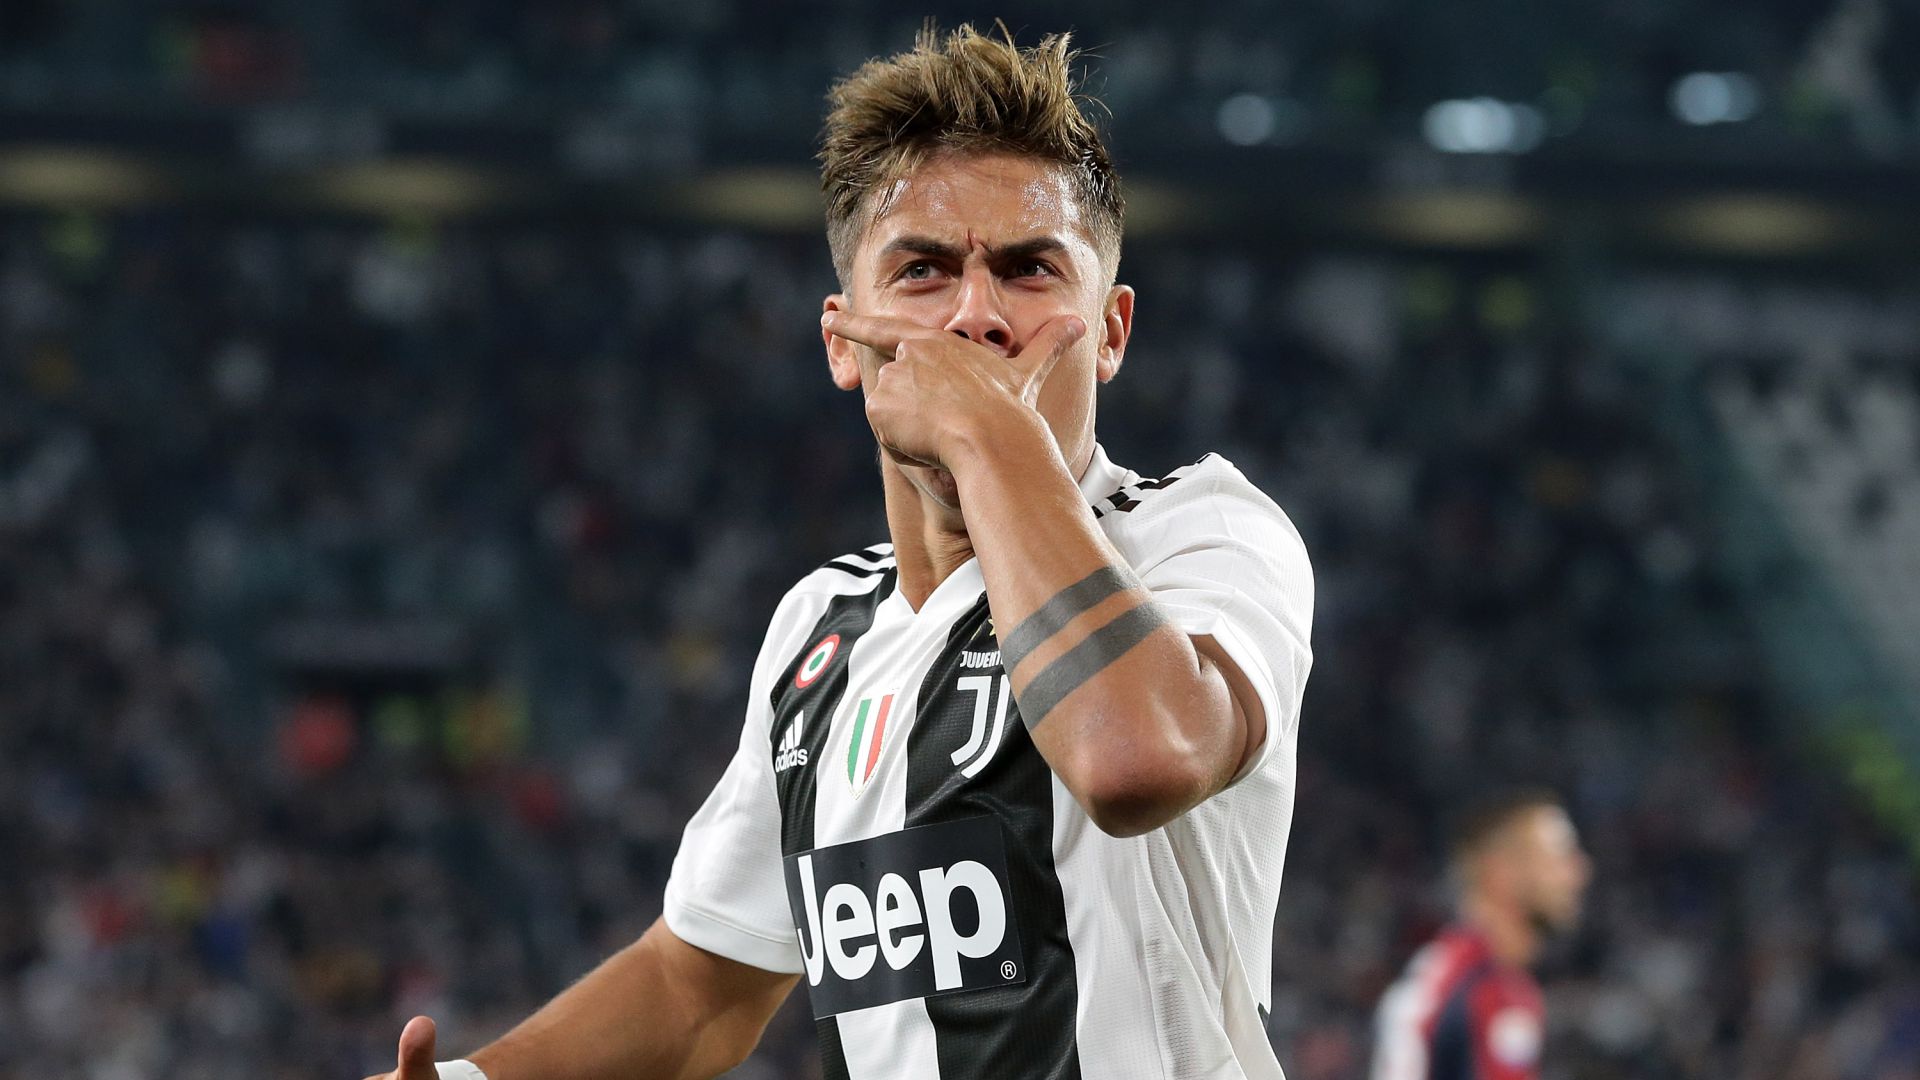 Manchester United and Juventus are prepared to make a swap deal involving Alexis Sánchez and Paulo Dybala. - Bóng Đá